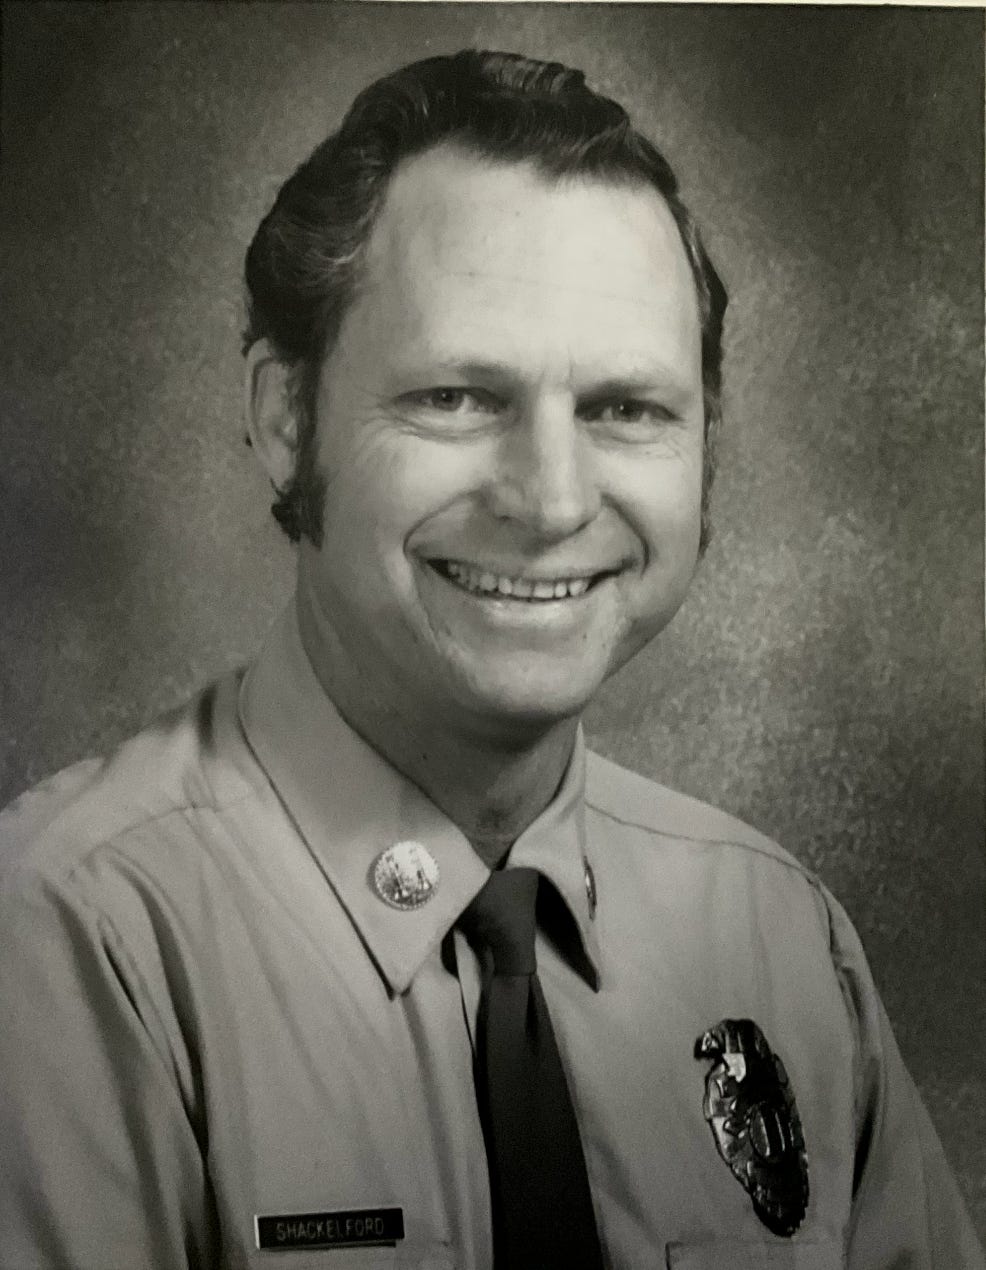 A black-and-white portrait of a middle-aged white man wearing an LA County Fire Department uniform.